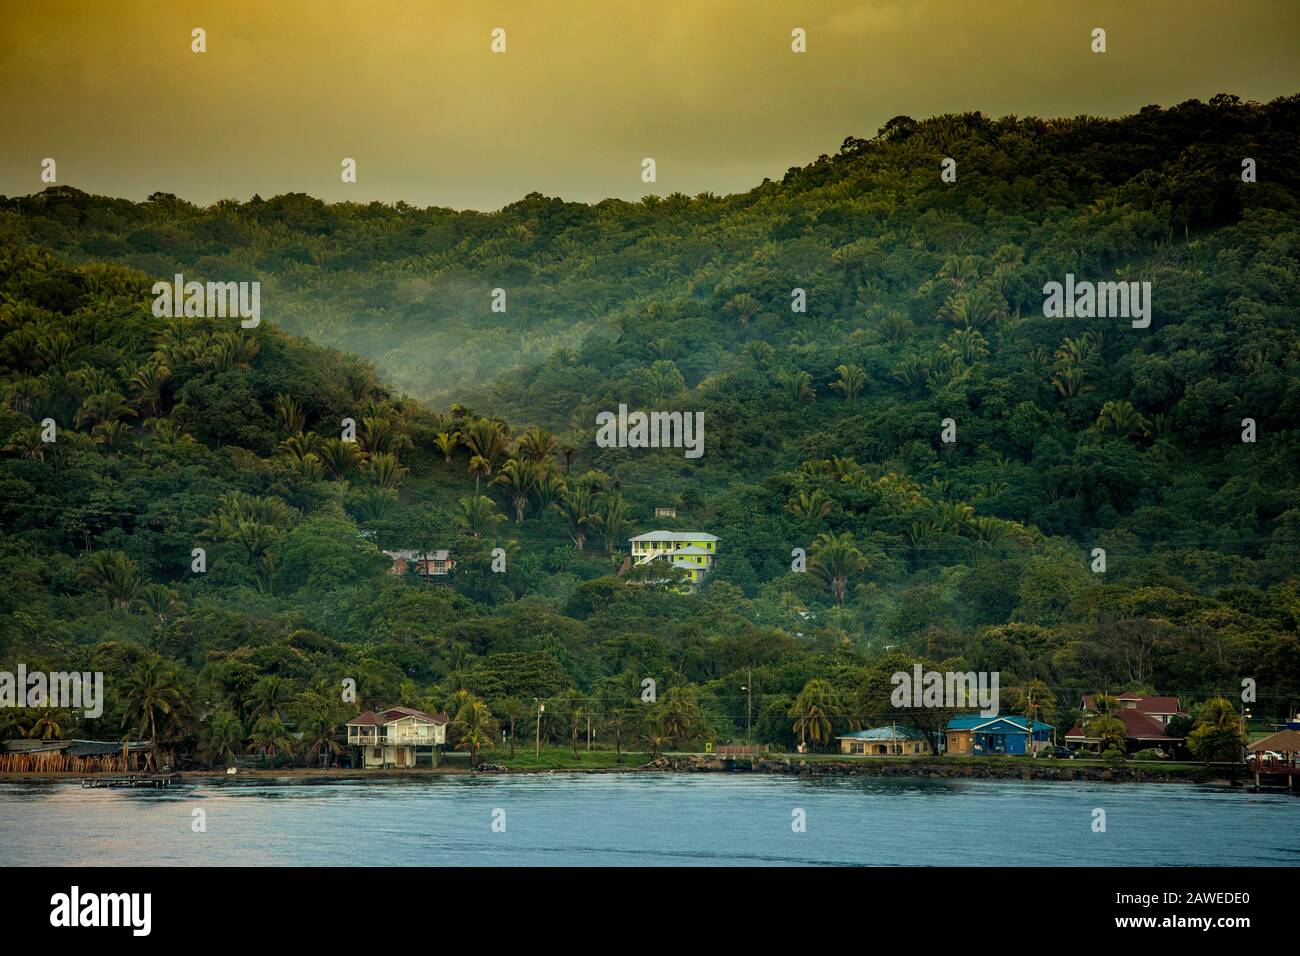 Tropical island if Roatan, Honduras in early morning with haze and humidity. Stock Photo